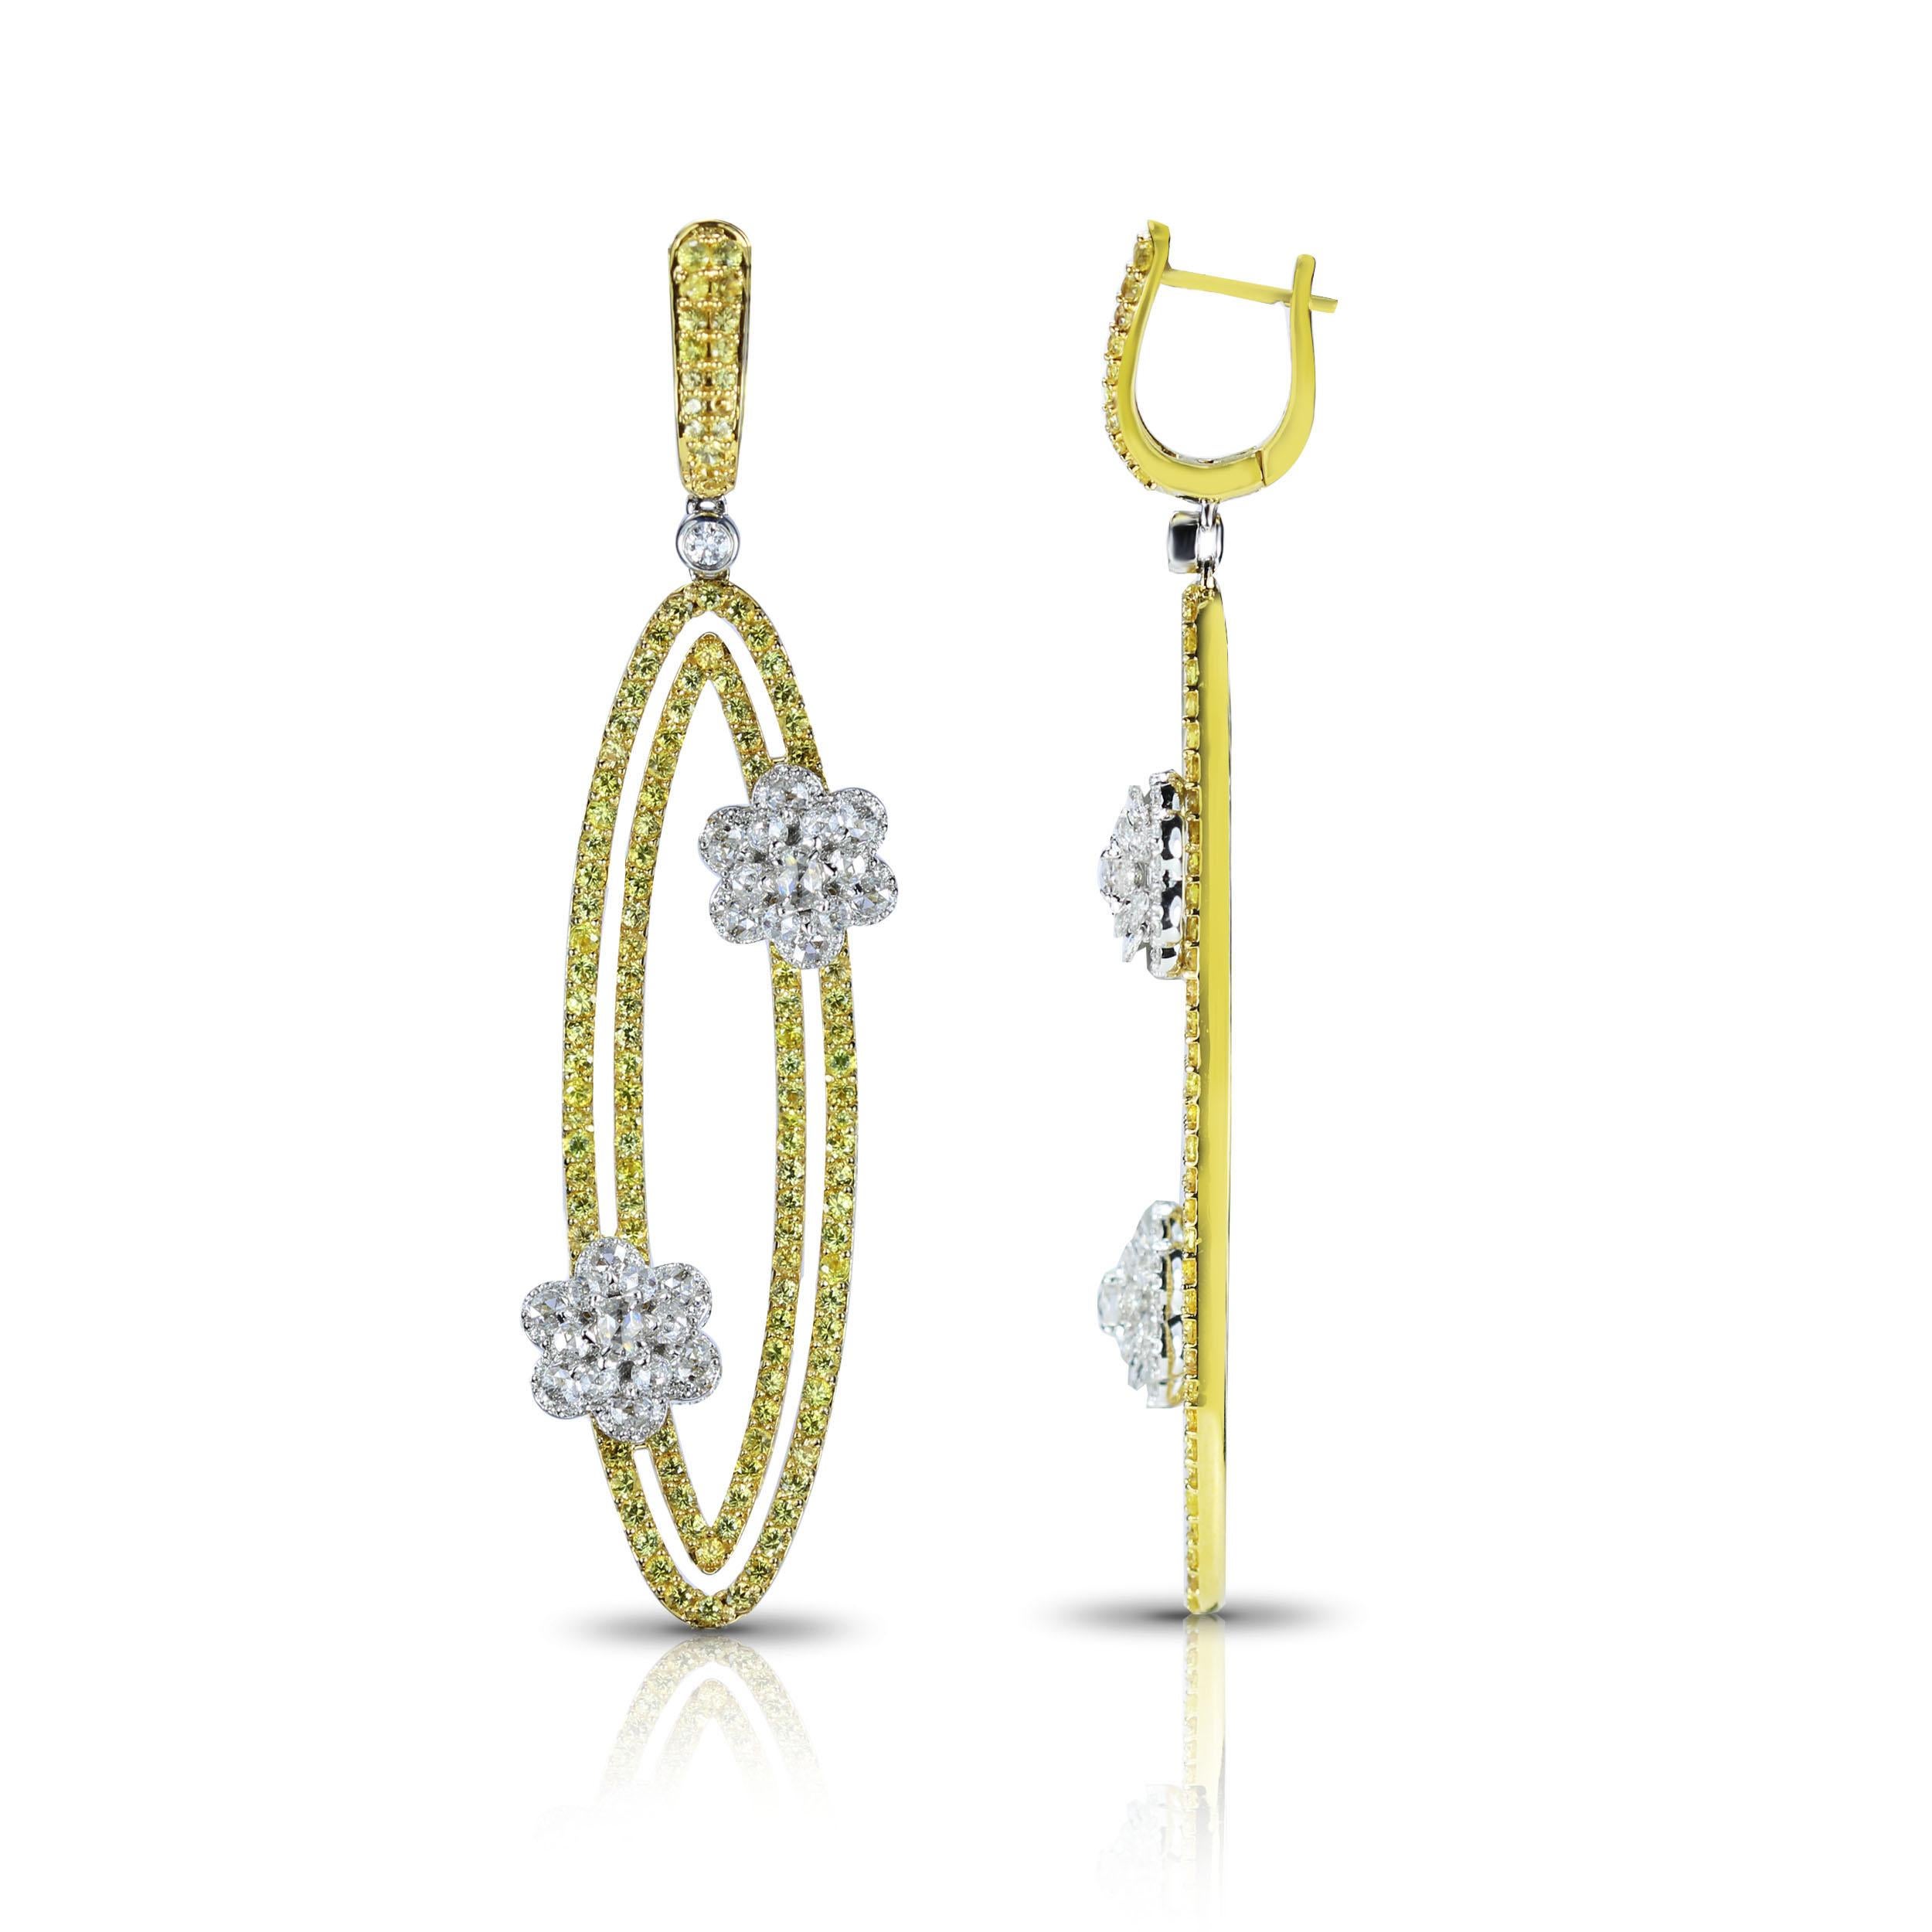 F-G/ VVS-VS-SI Diamond and Yellow Sapphire Earrings

Geometry and nature inspirations come together in these earrings that are one for the ages. Beaded yellow sapphires form oval loops that are brought together with floral motifs composed of round,